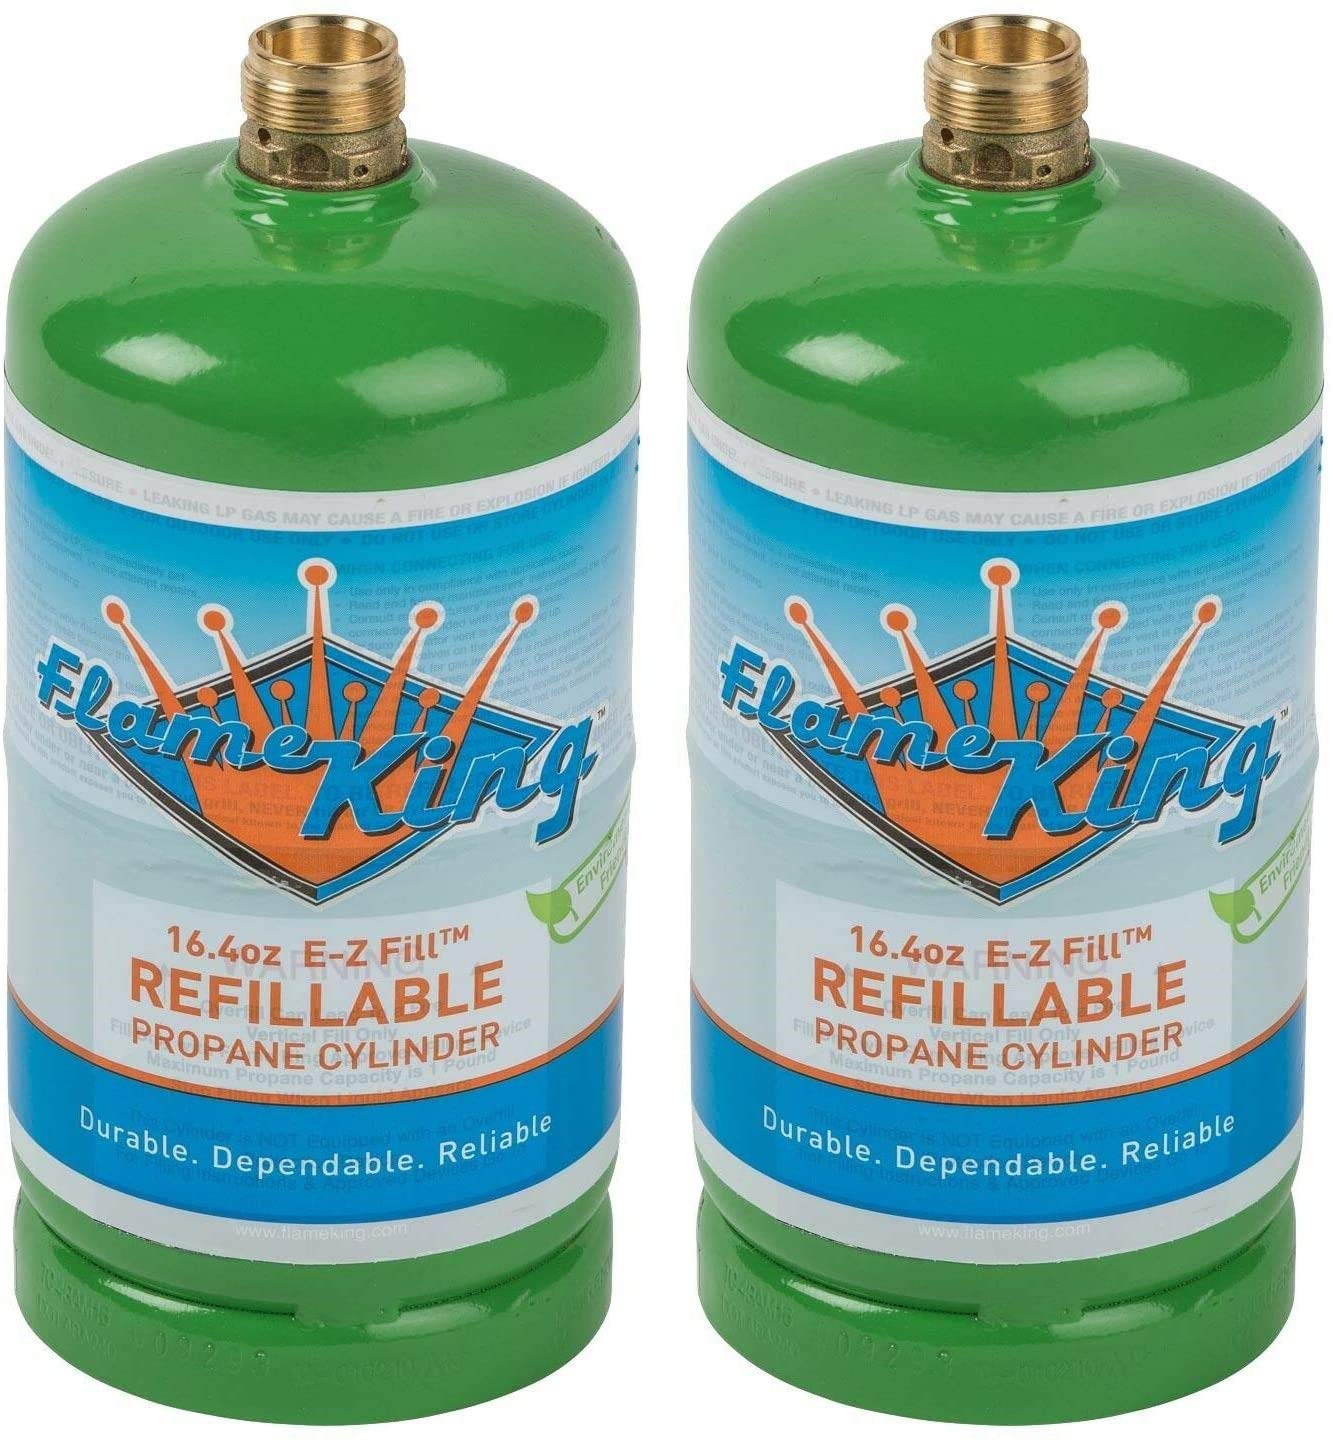 2-Pack 1-Lb. Flame King Refillable Empty Propane Cylinder Tank $32.50 + Free Shipping w/ Amazon Prime or $35+ orders